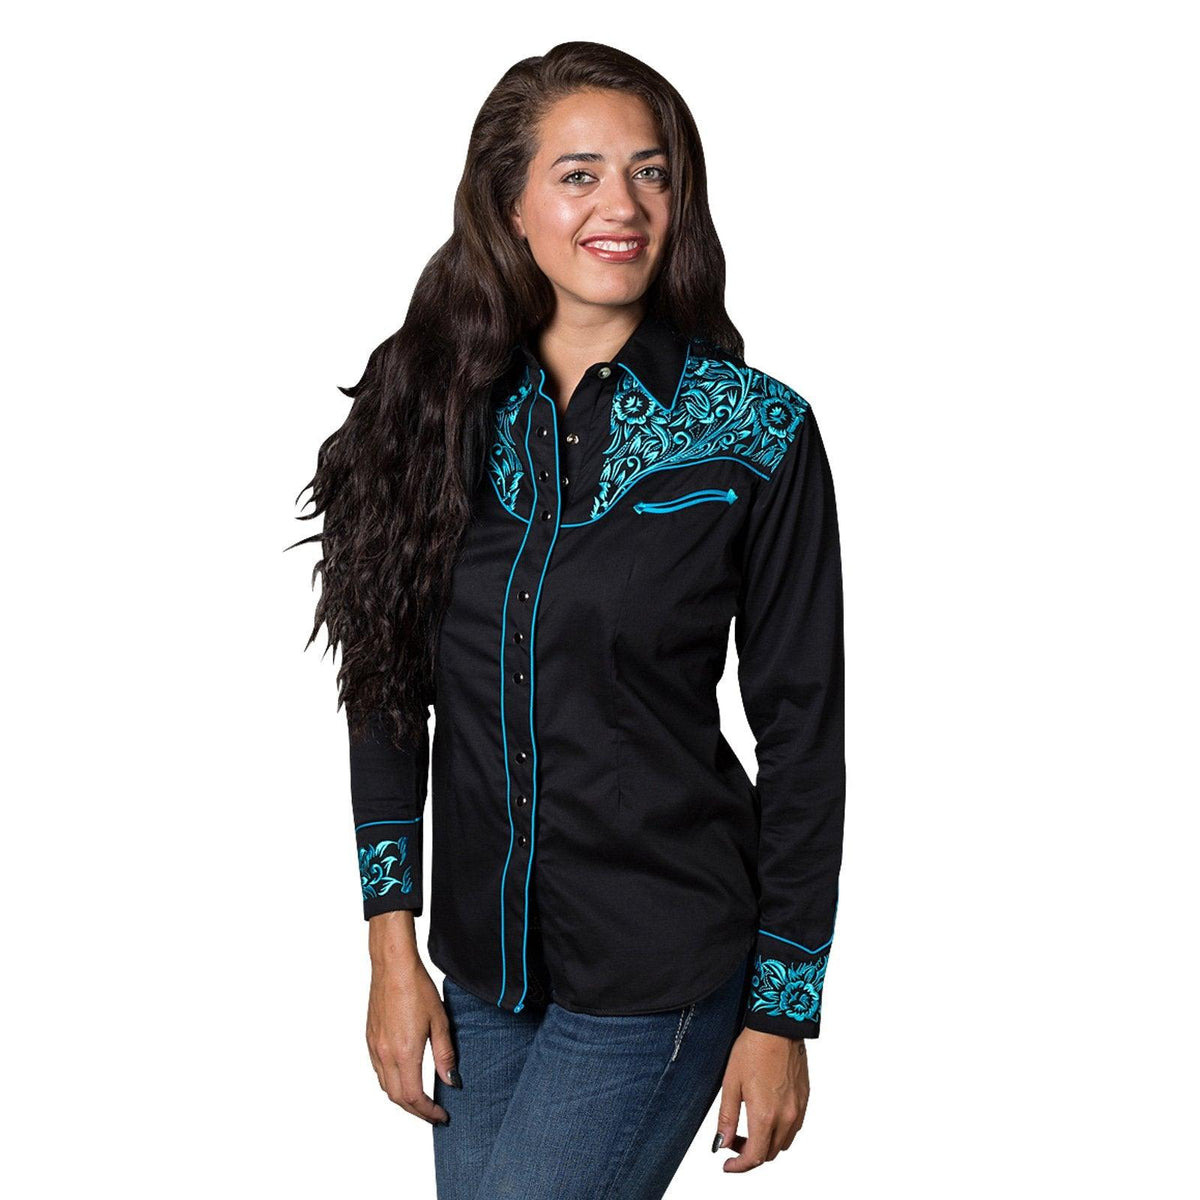 Women's Vintage Tooling Embroidery Black & Turquoise Western Shirt - Flyclothing LLC